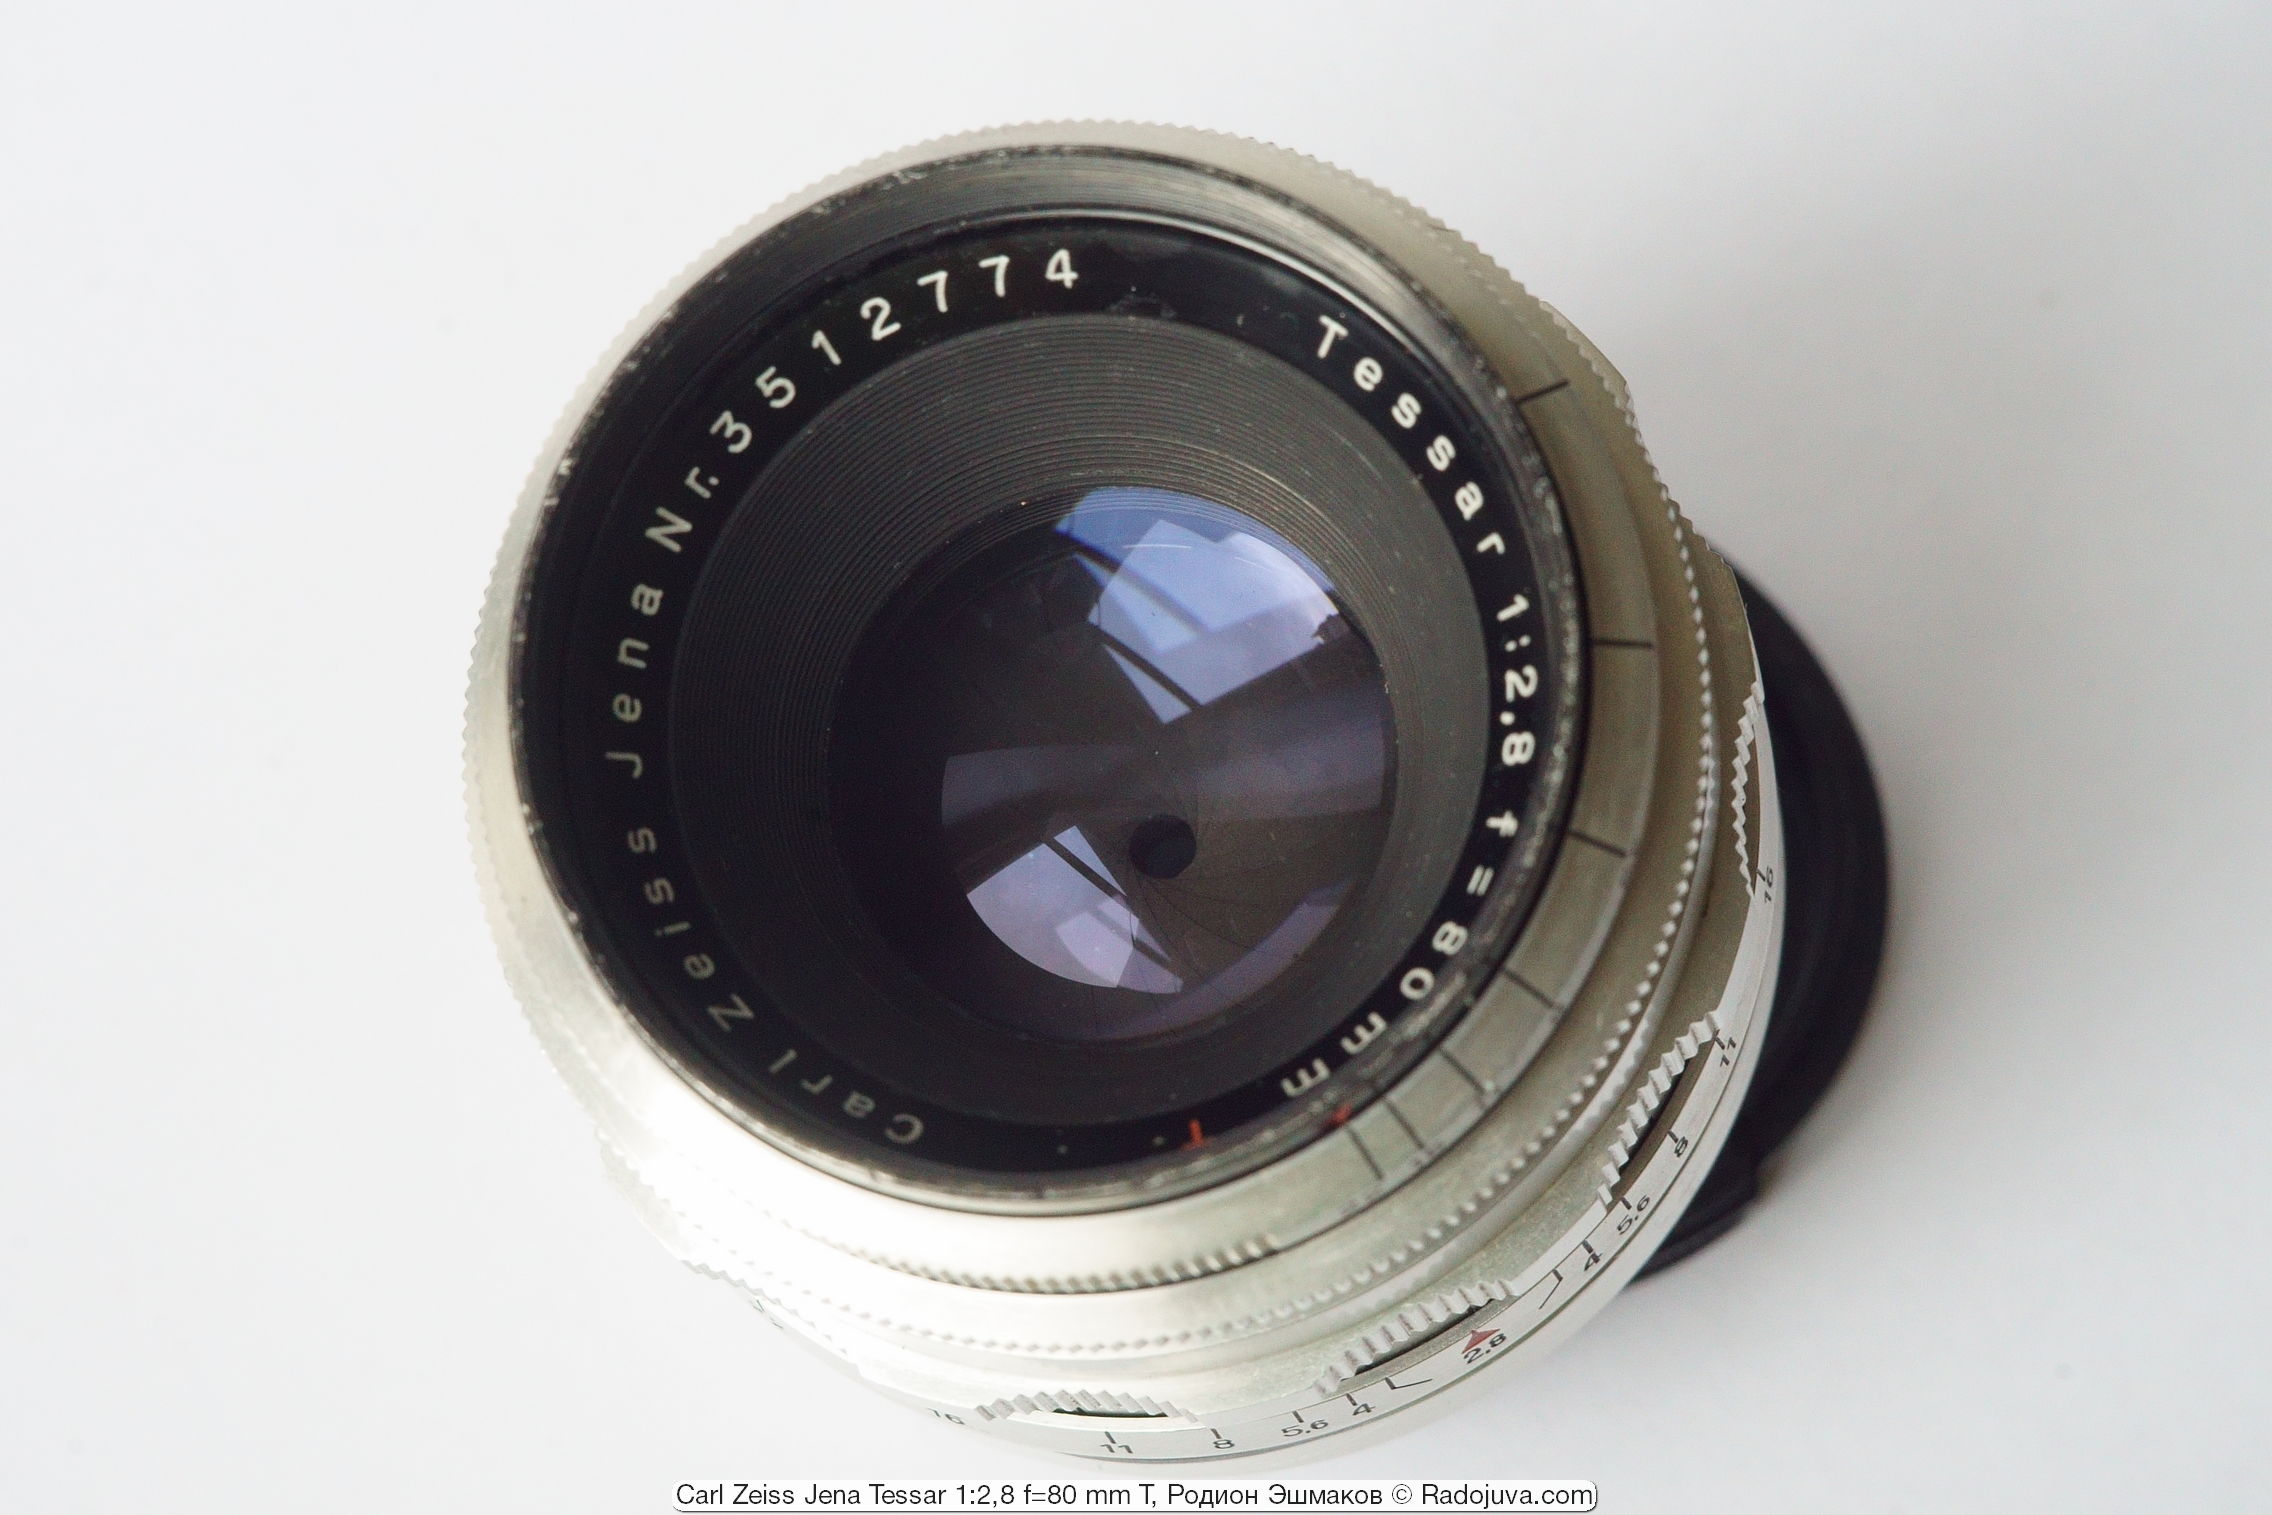 The lenses of the Tessar 80 / 2.8 are cast in a violet-blue color.